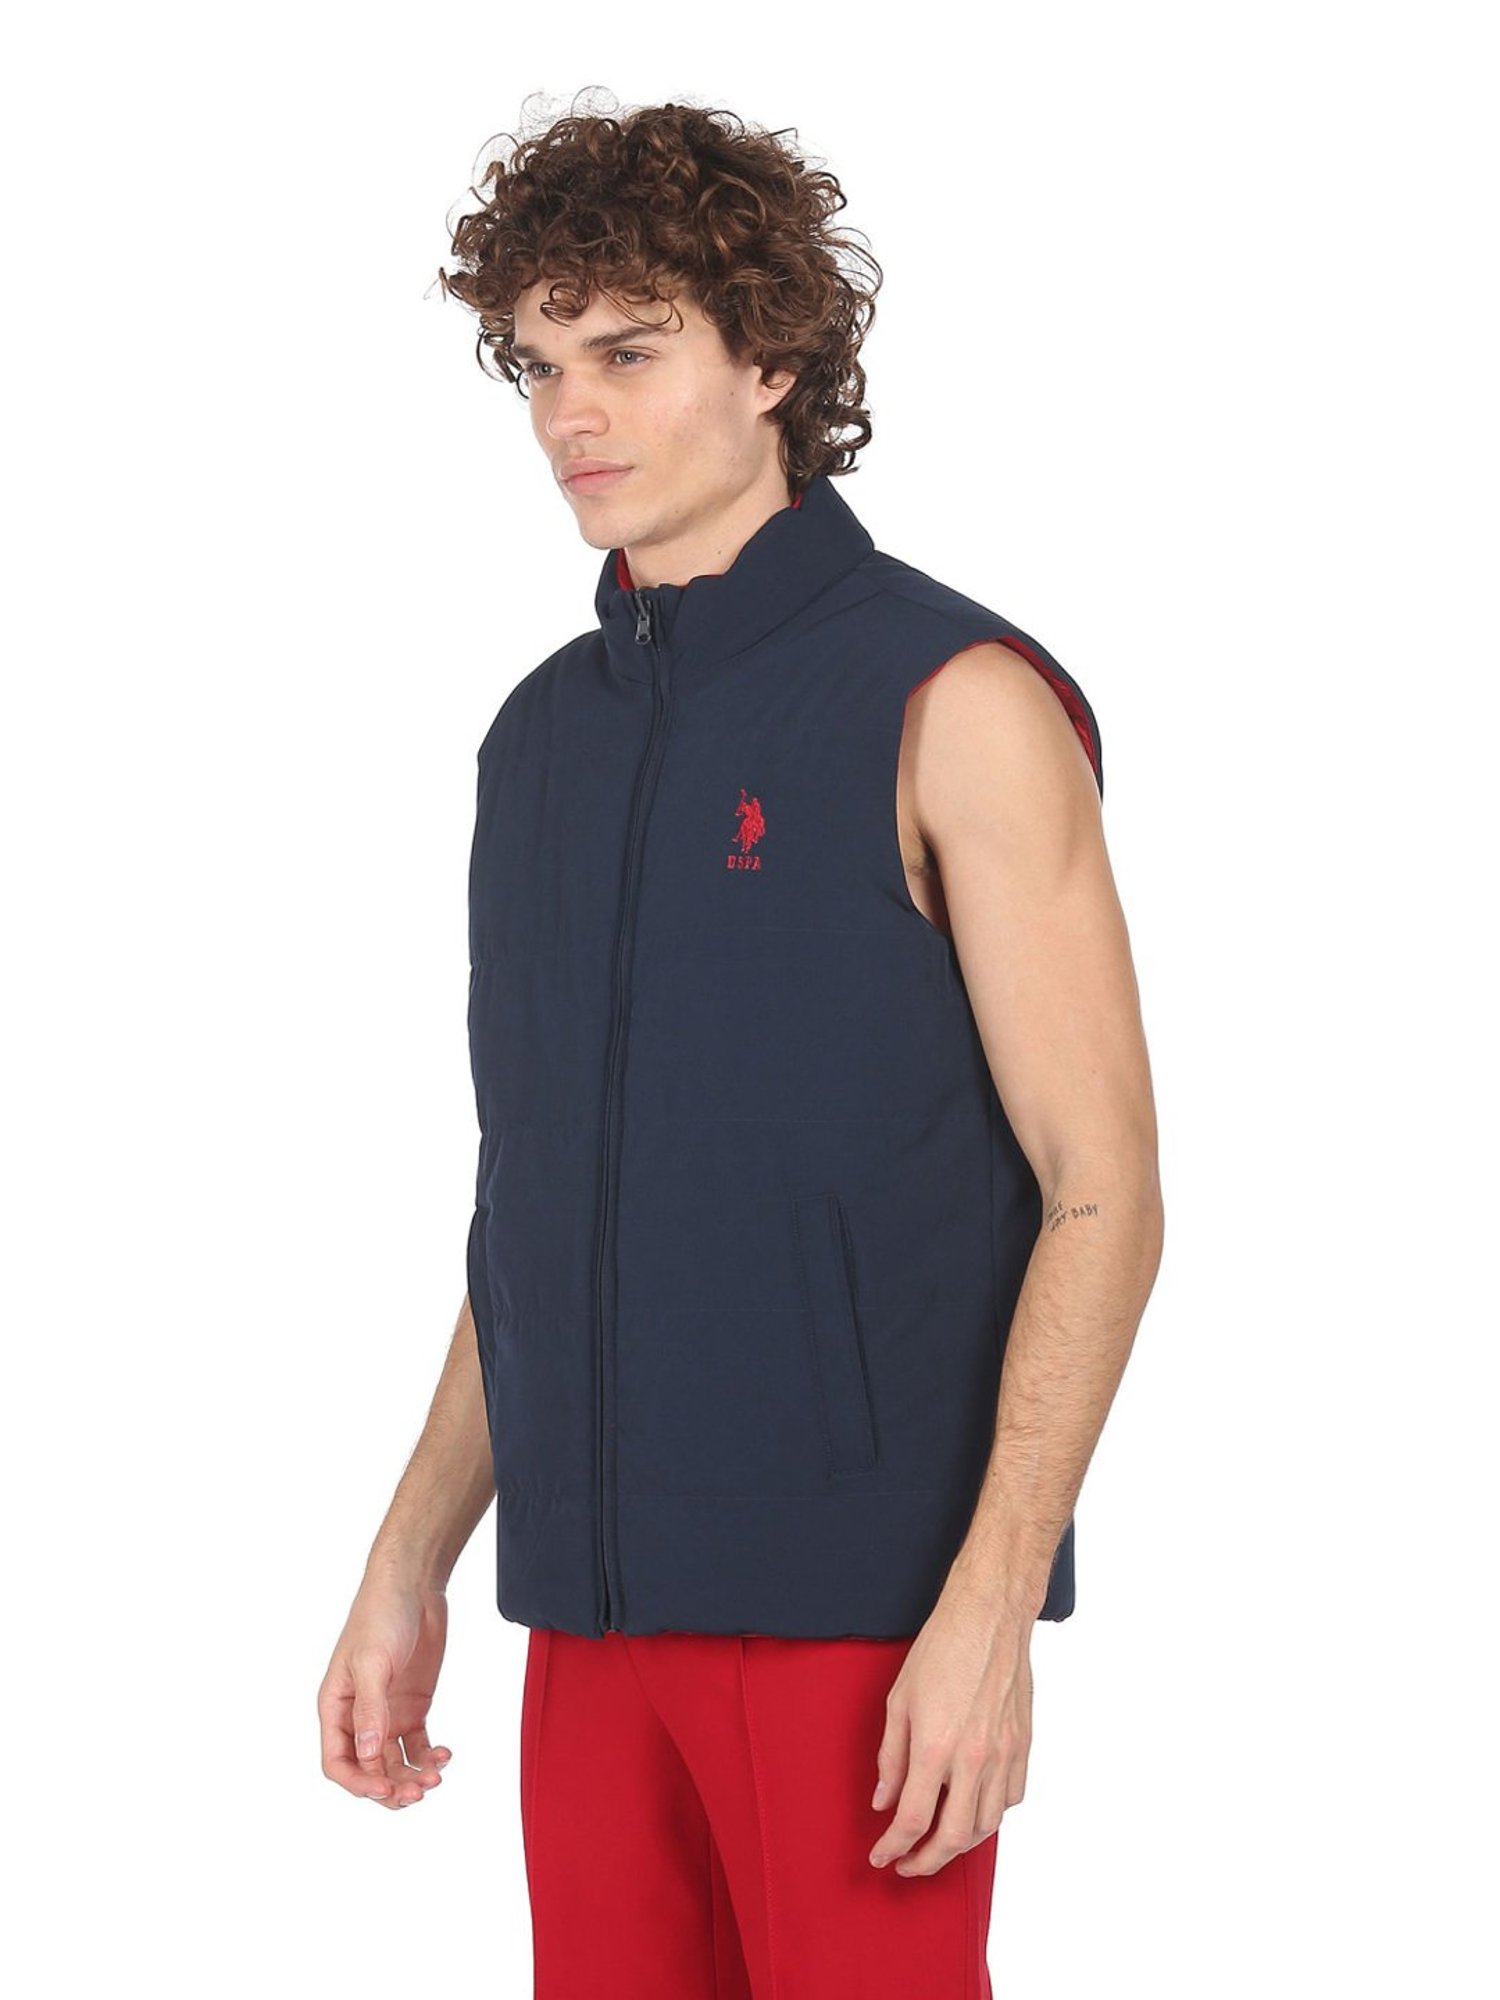 Buy U.S. POLO ASSN. Full Sleeve Front Half Open HIGH Neck, S  (USSWS4025_S_Black) at Amazon.in